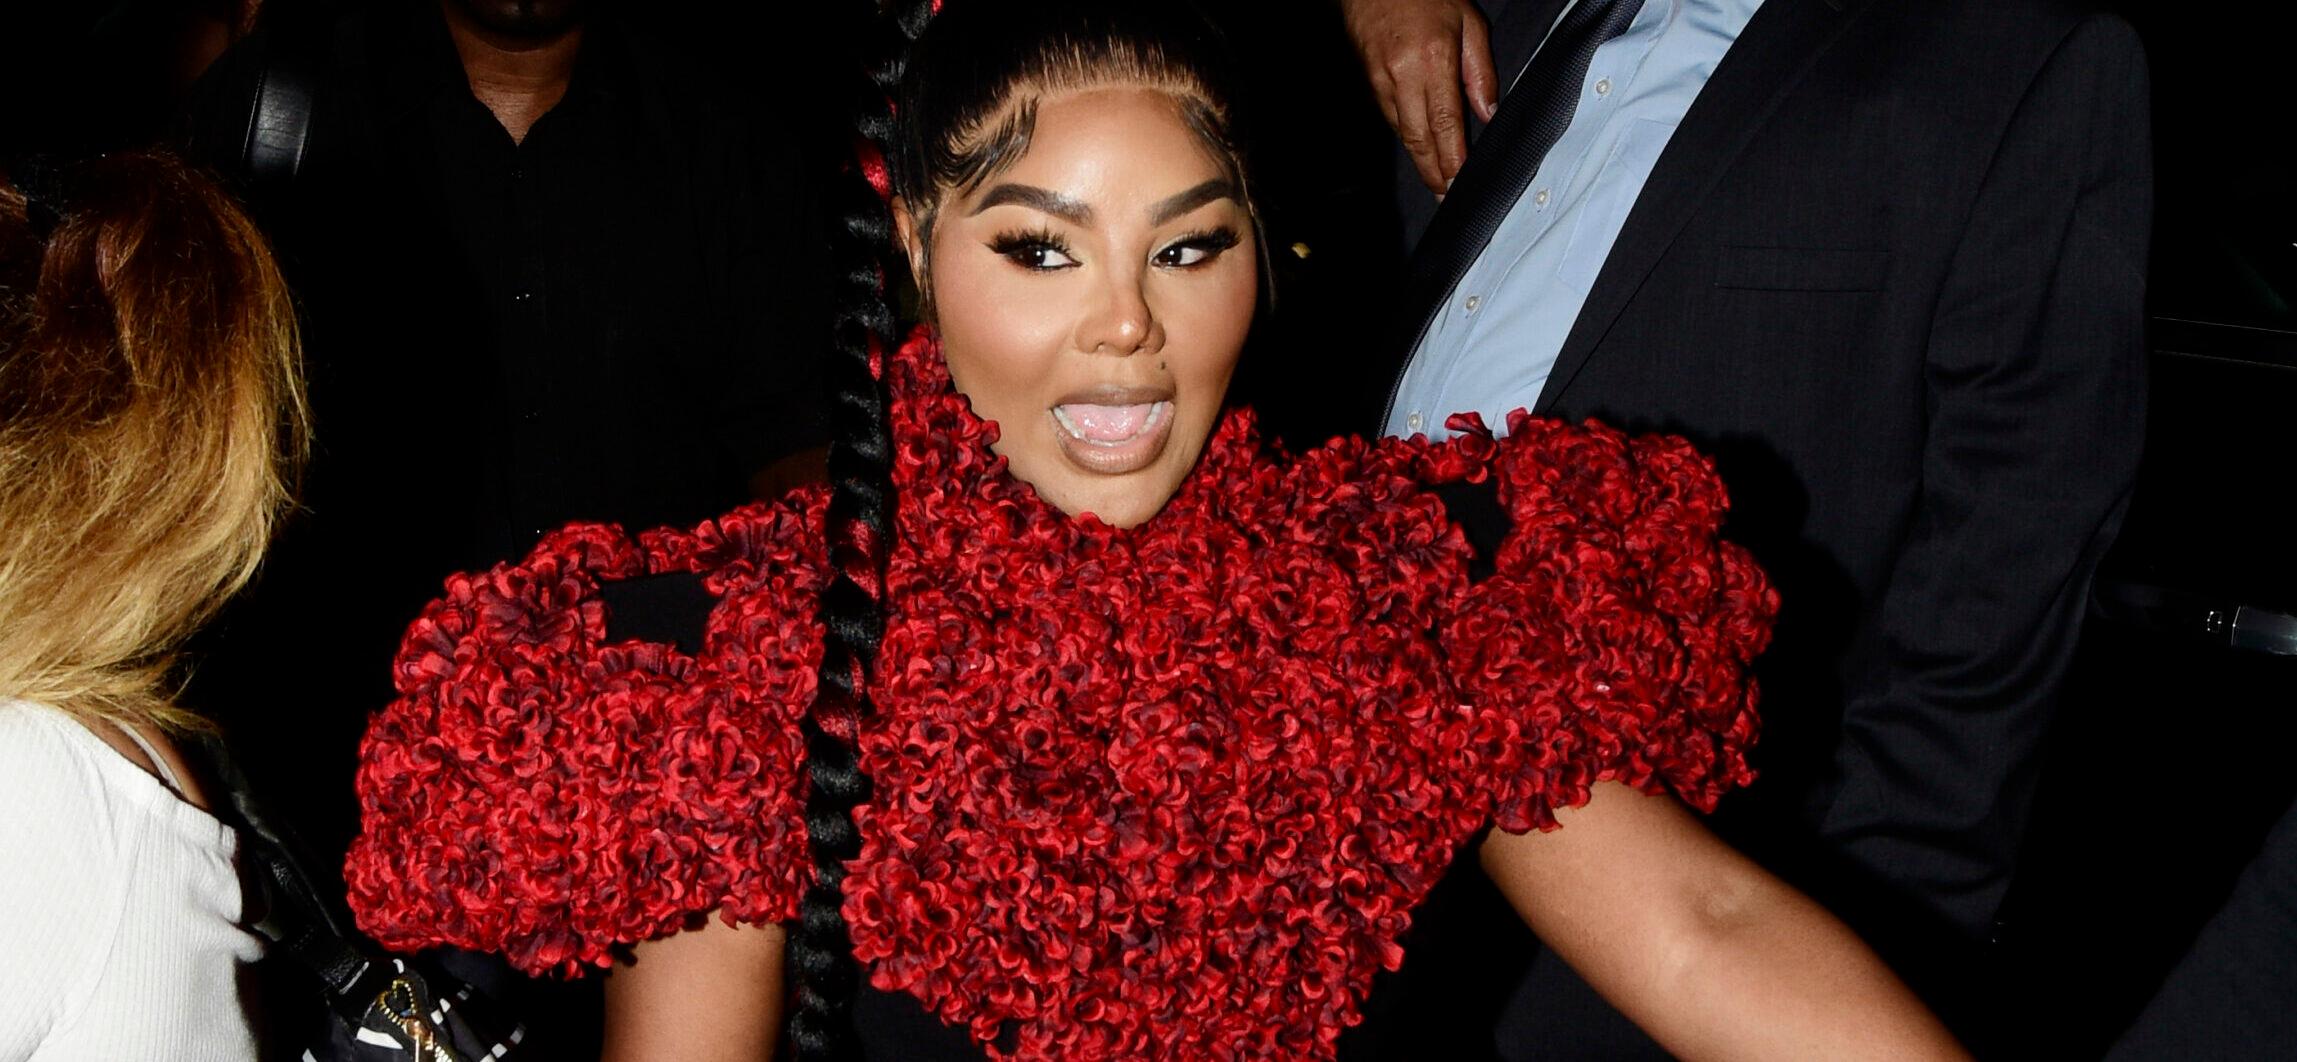 Lil’ Kim BLASTS 50 Cent Over Leprechaun Comparison, ‘You’re Obsessed With Me’